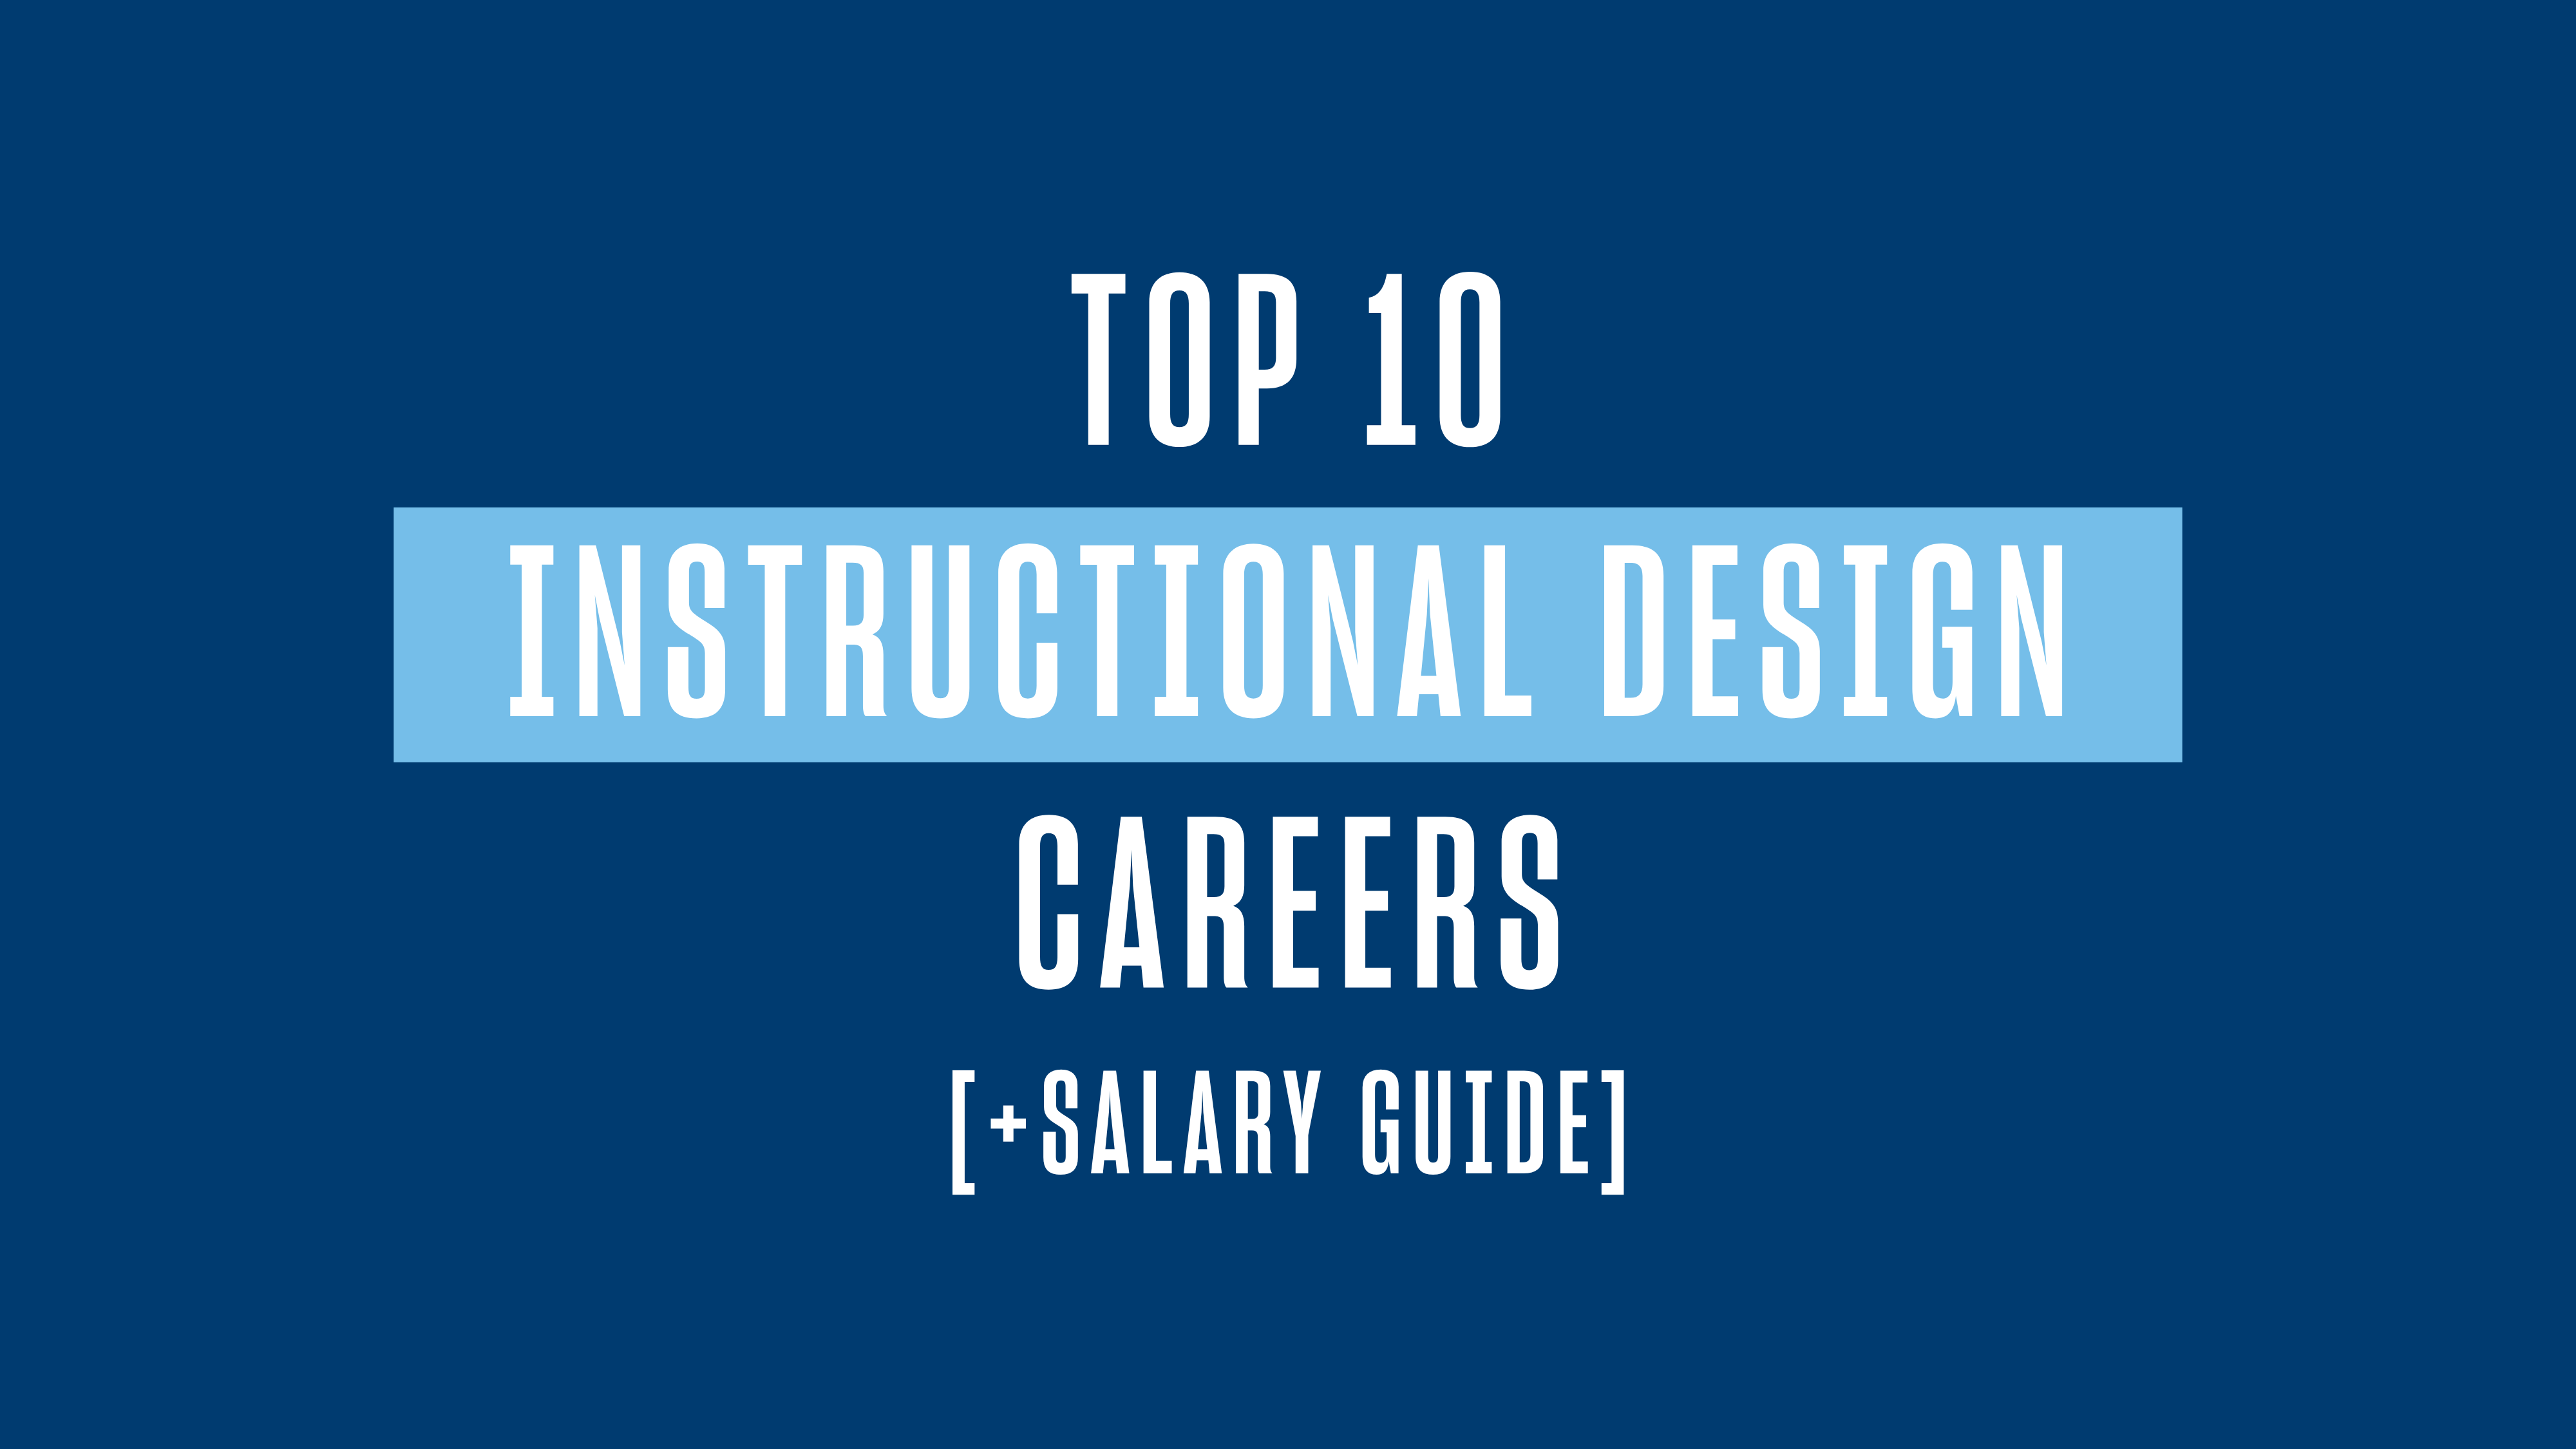 Top 10 Instructional Design Careers [+ Salary Guide]